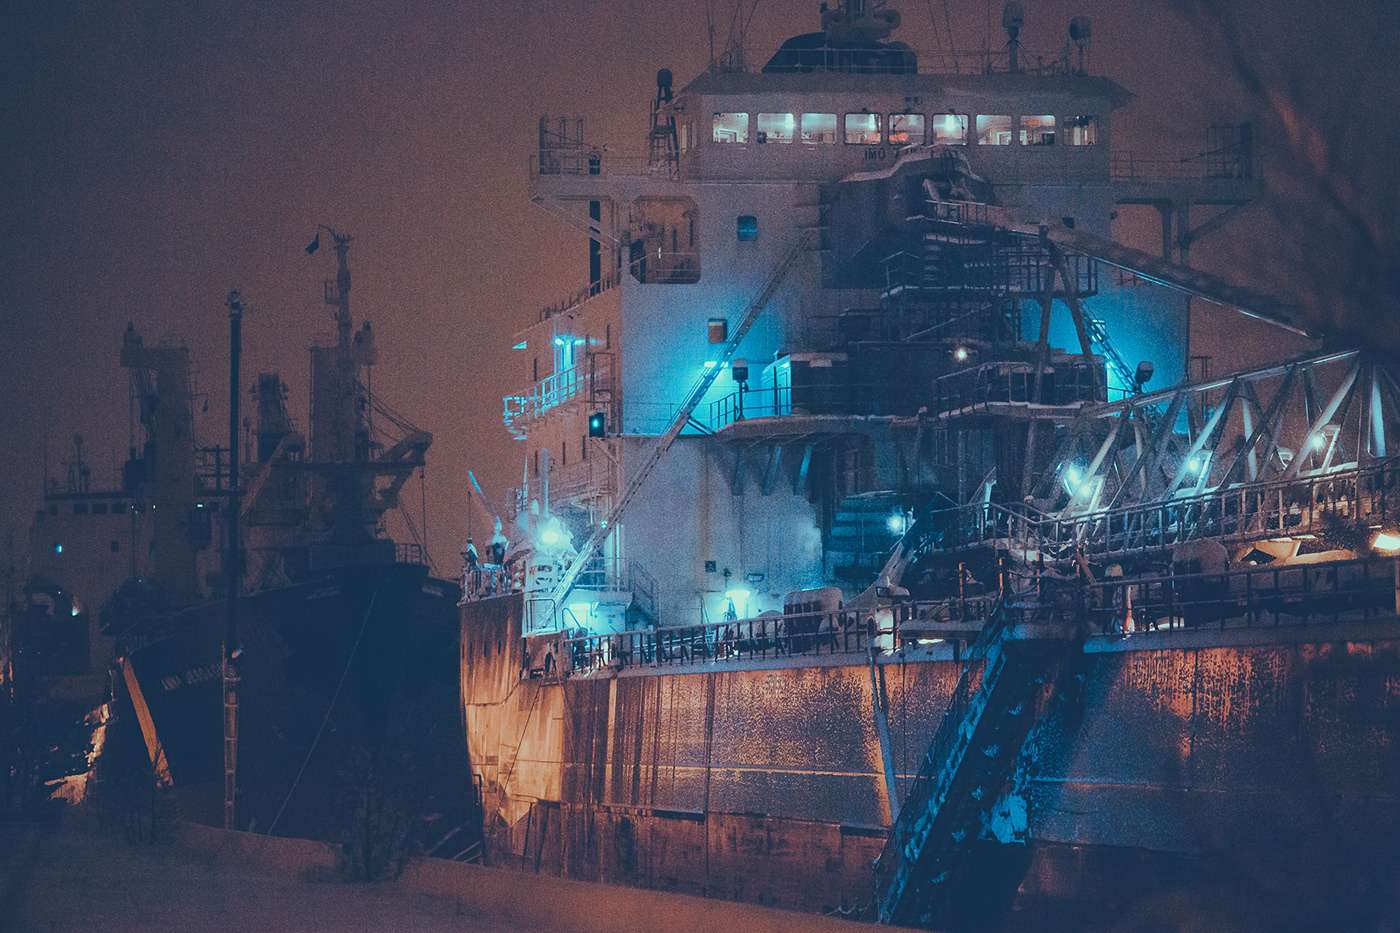 5am MORNING early cold winter spring snow Montreal port boat ship RoadTrip Nightlife